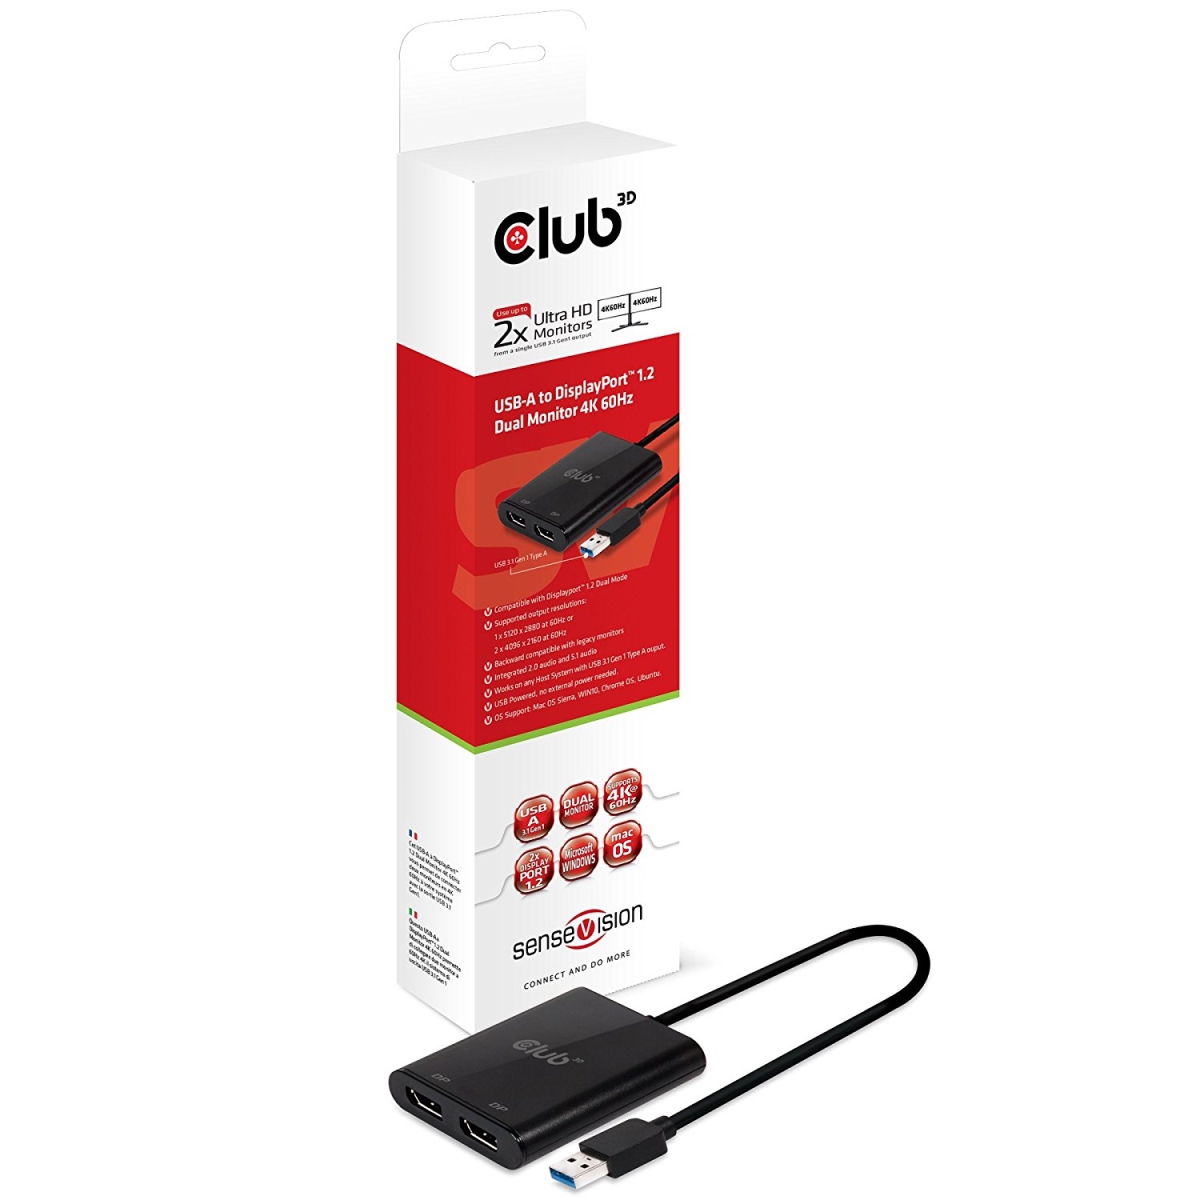 Picture of Club 3D CSV-1477 SenseVision USB A to DisplayPort 1.2 Dual Monitor 4K 60Hz